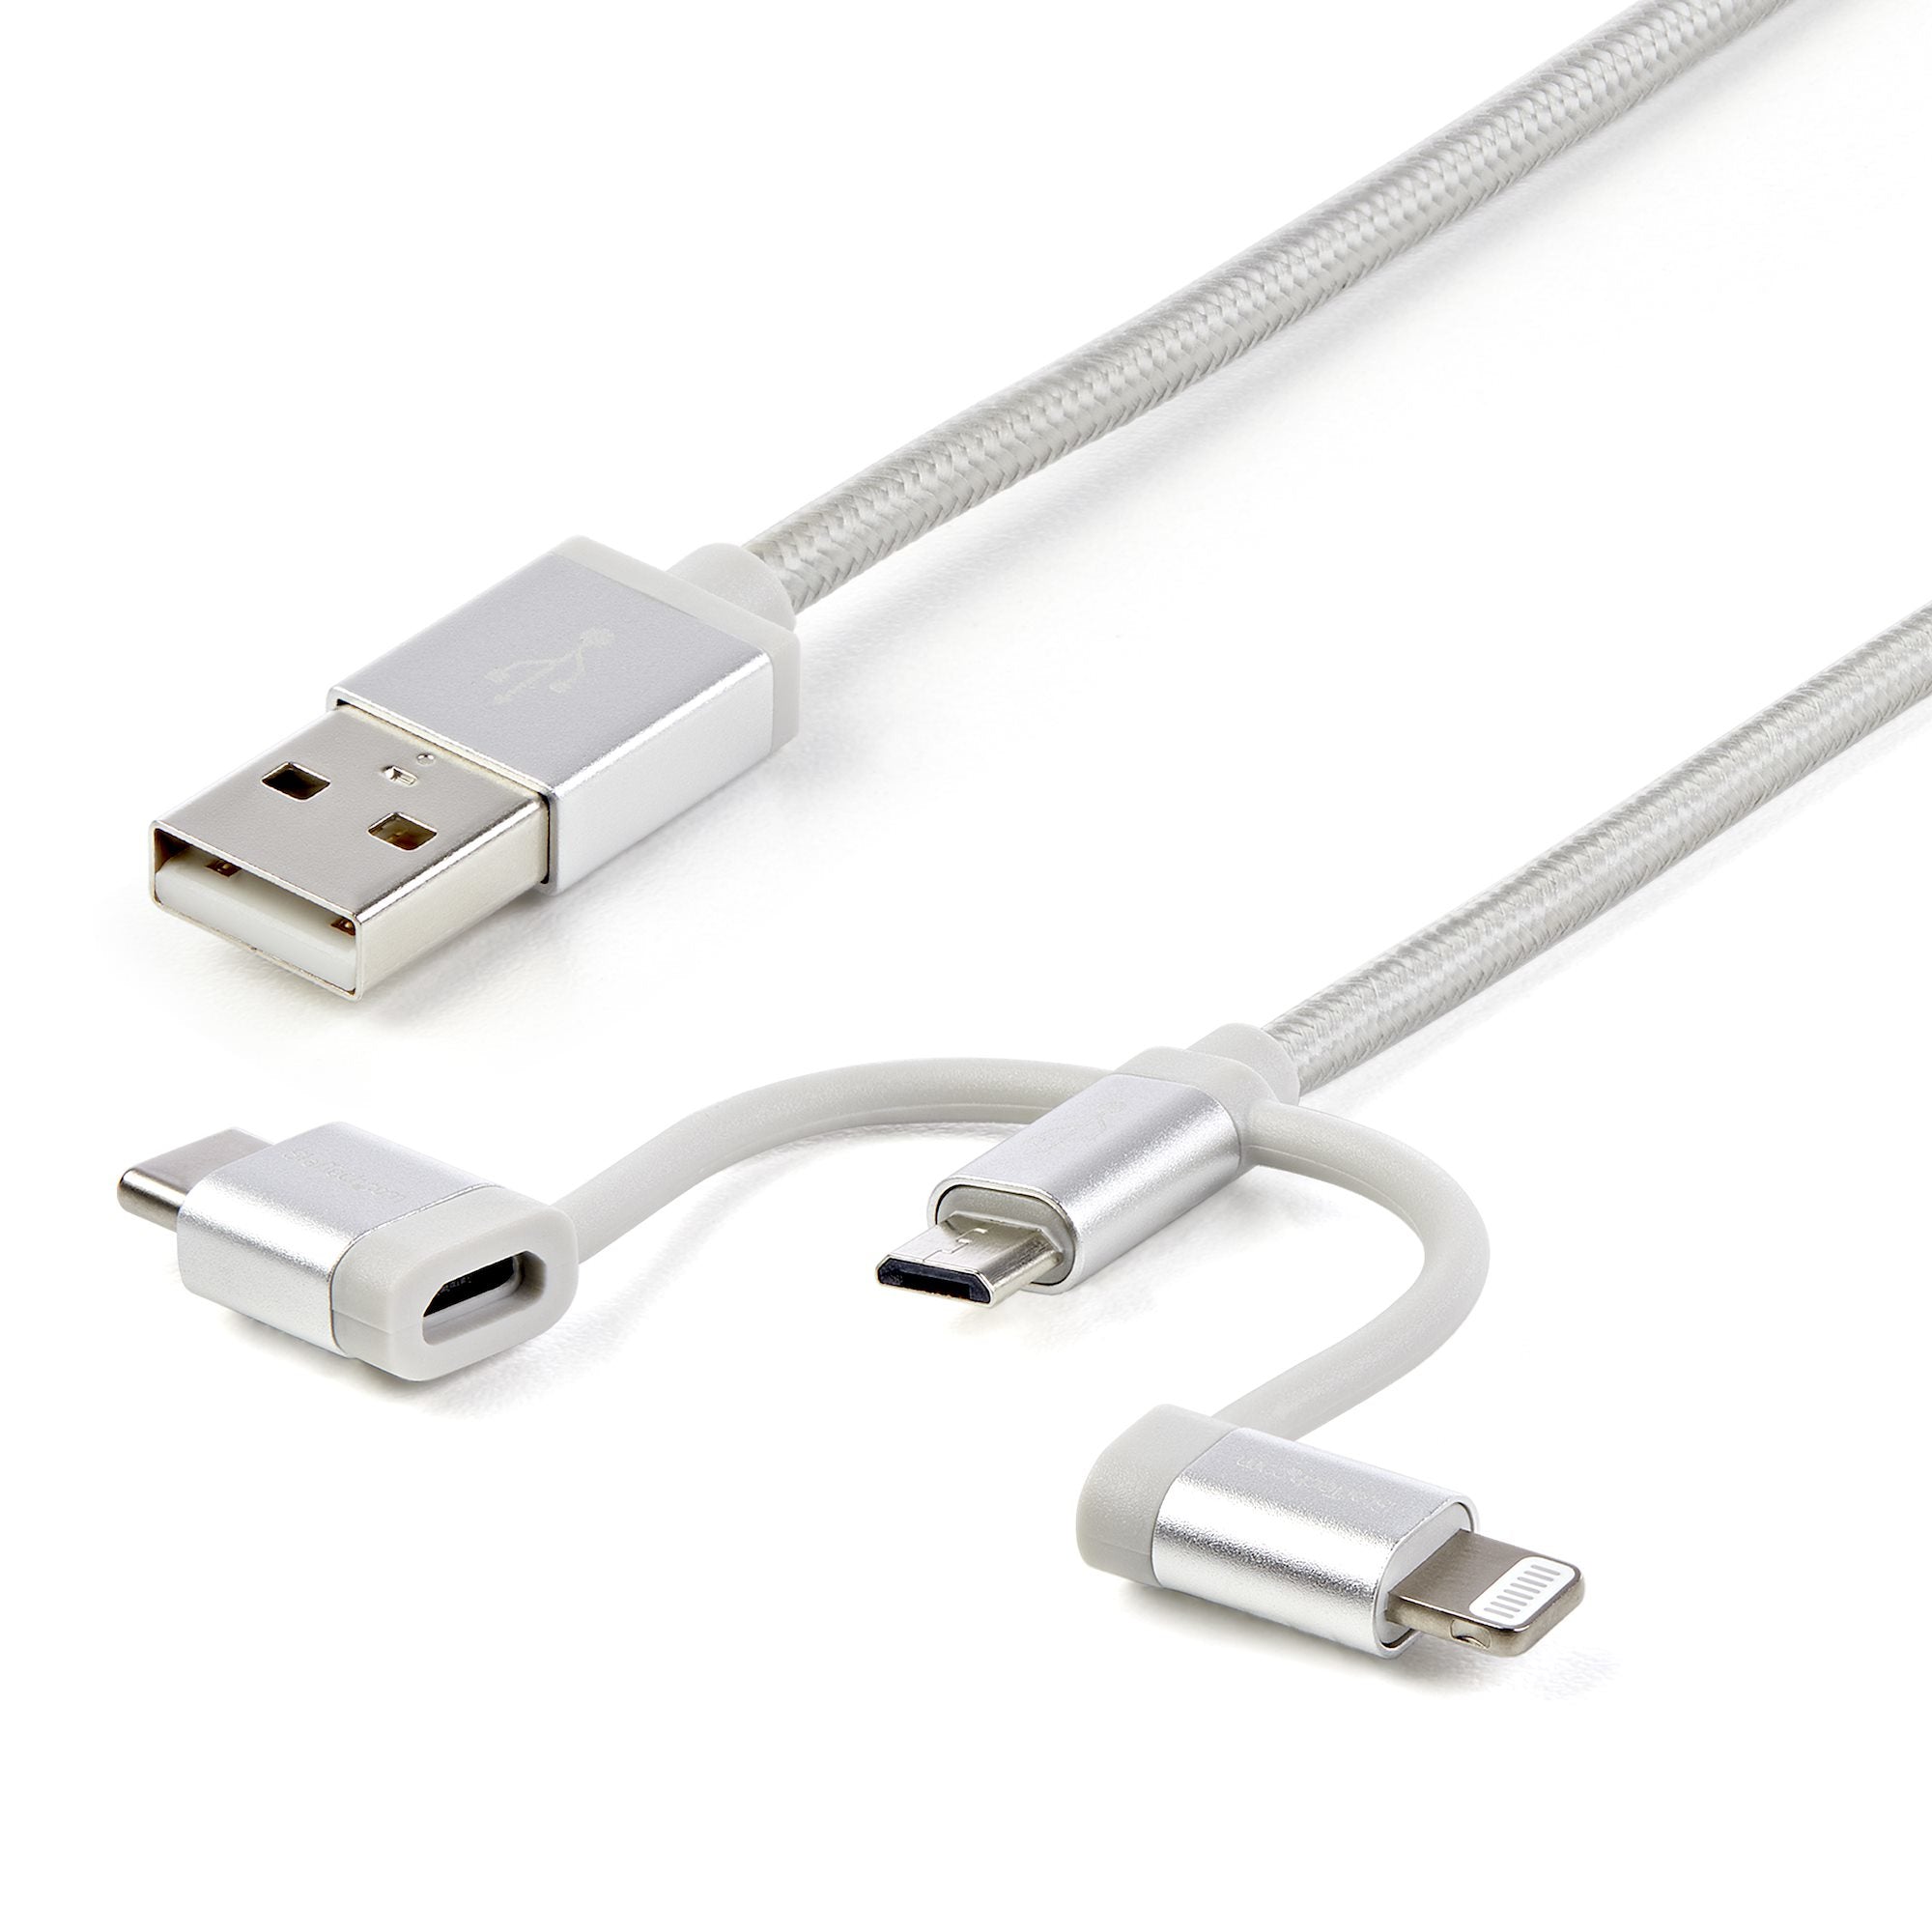 Startech 1 M (3 F.T) USB Multi Charging Cable - USB To Micro-USB Or USB-C Or Lightning For Iphone Ipad Ipod Android - Apple Mfi Certified - 3 In 1 USB Charger - Braided-(LTCUB1MGR)